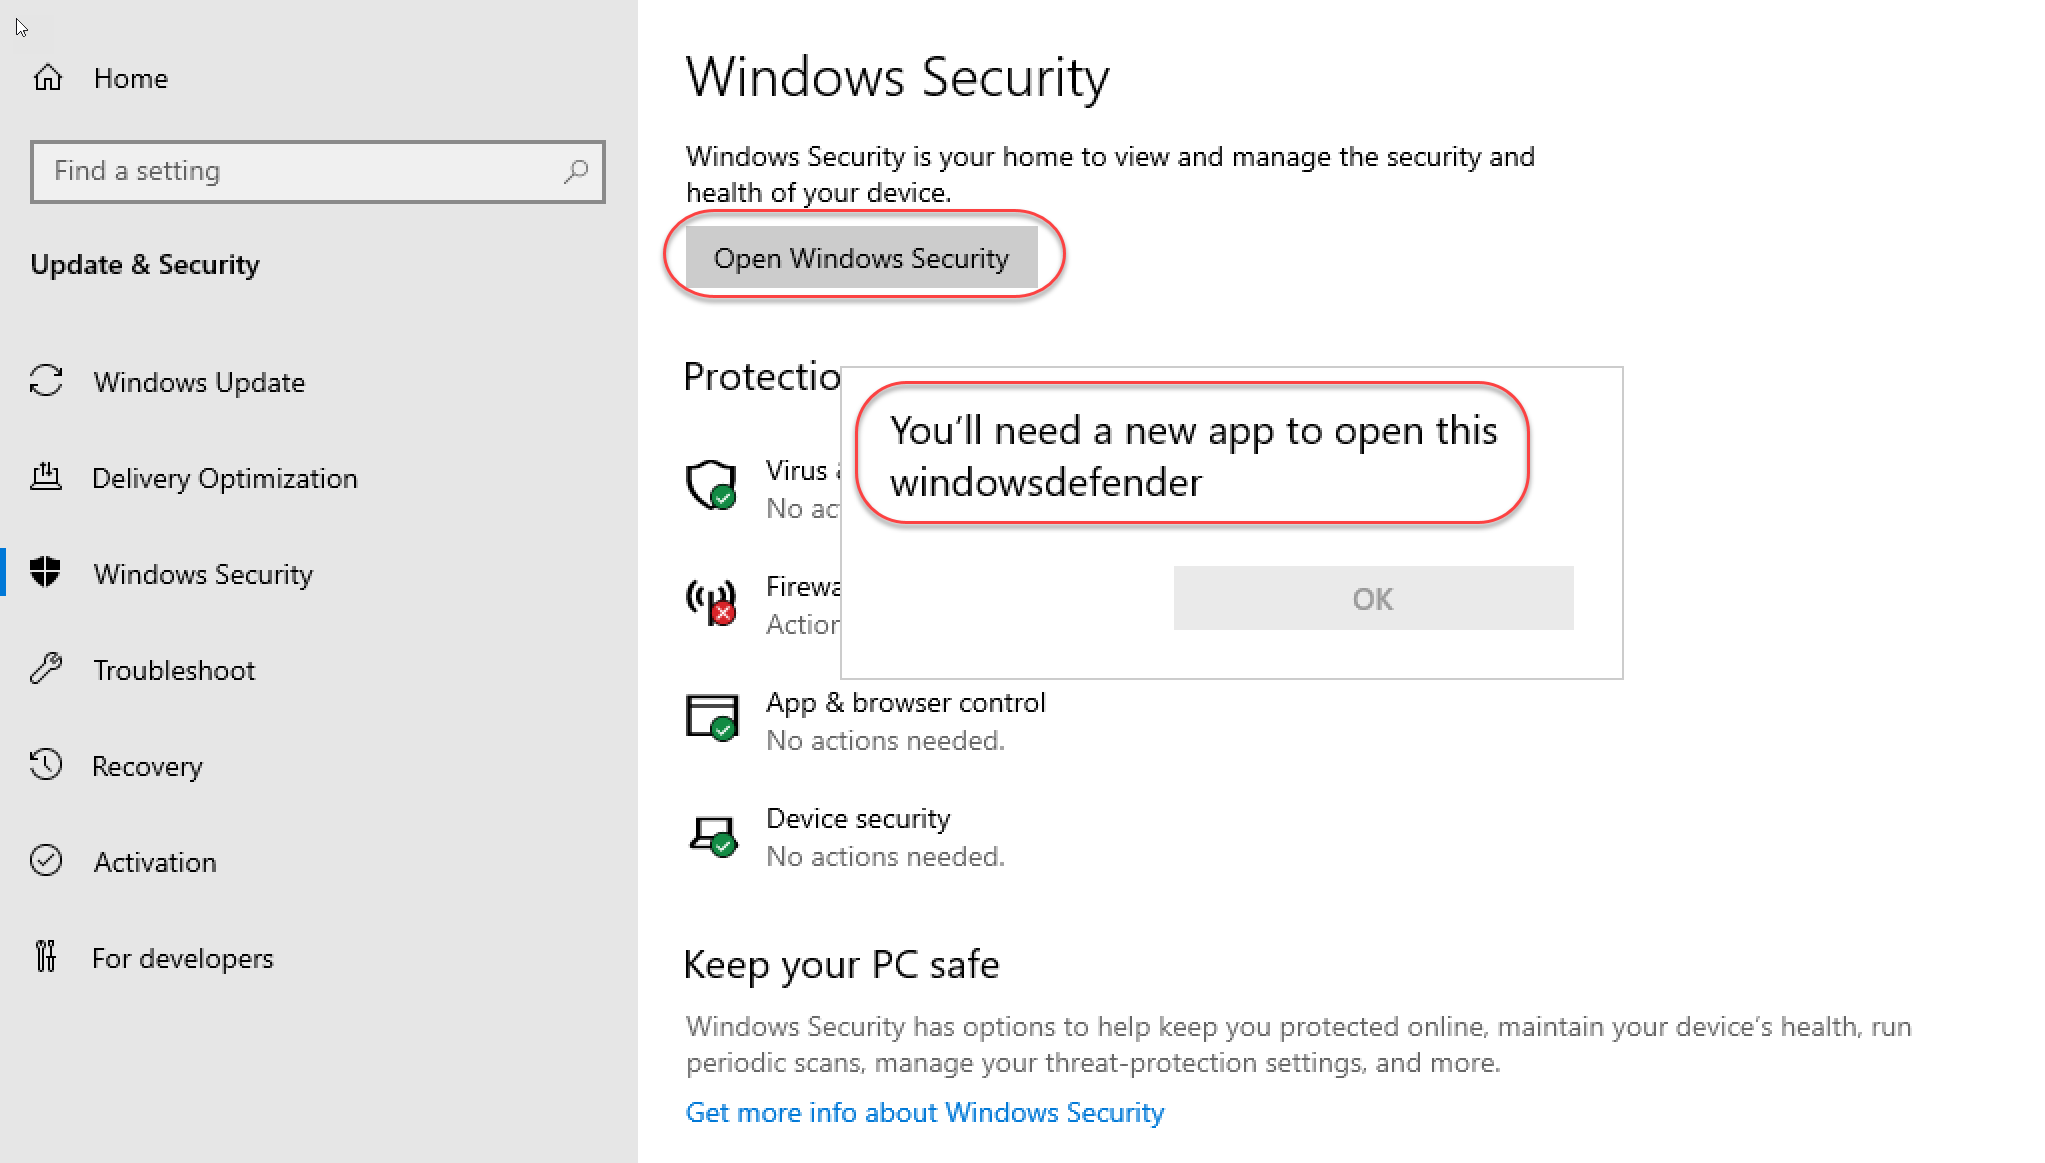 You'll need a new app to open this windowsdefender